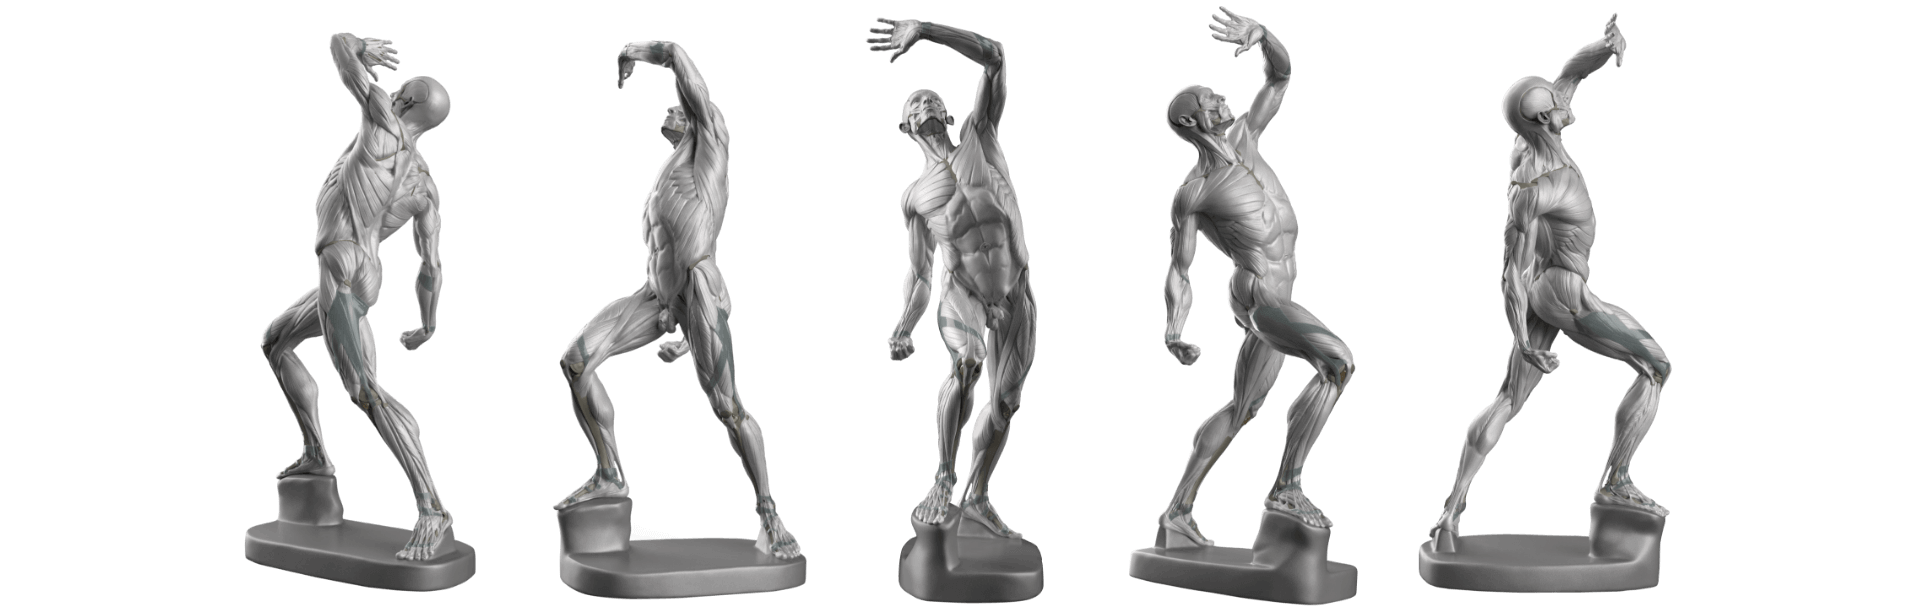 anatomy for sculptors about us visuals